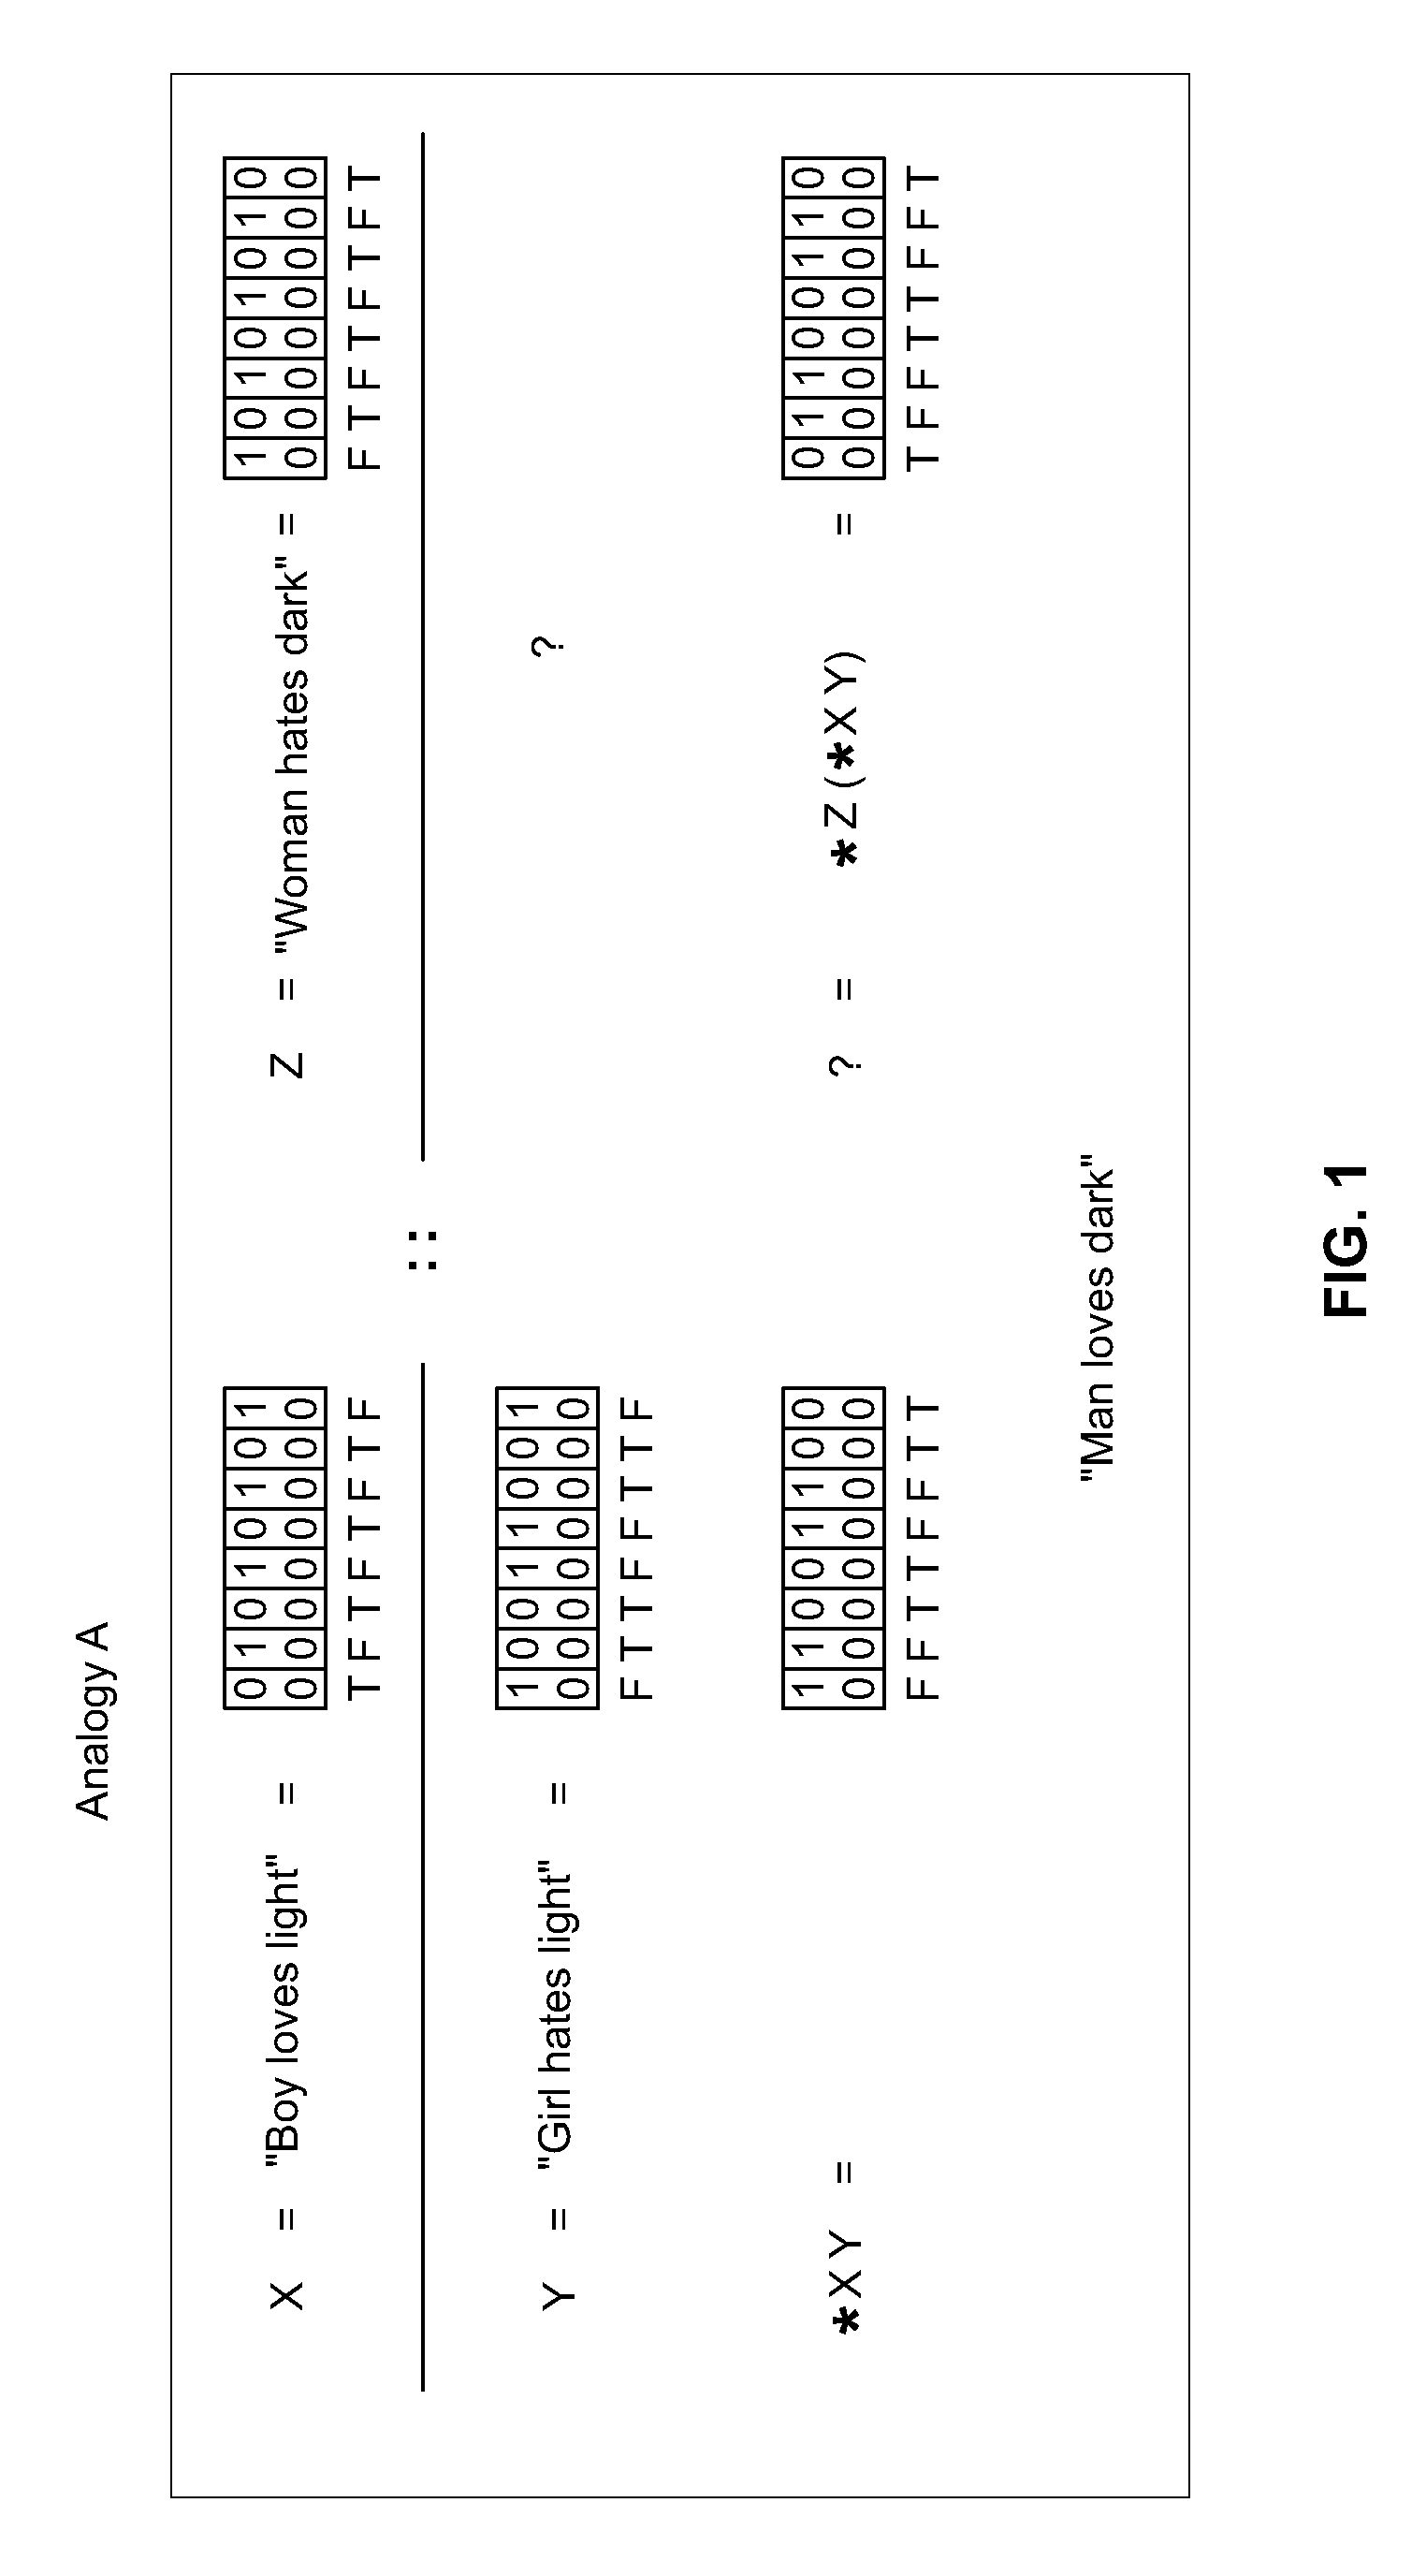 Methods and systems of four valued analogical transformation operators used in natural language processing and other applications